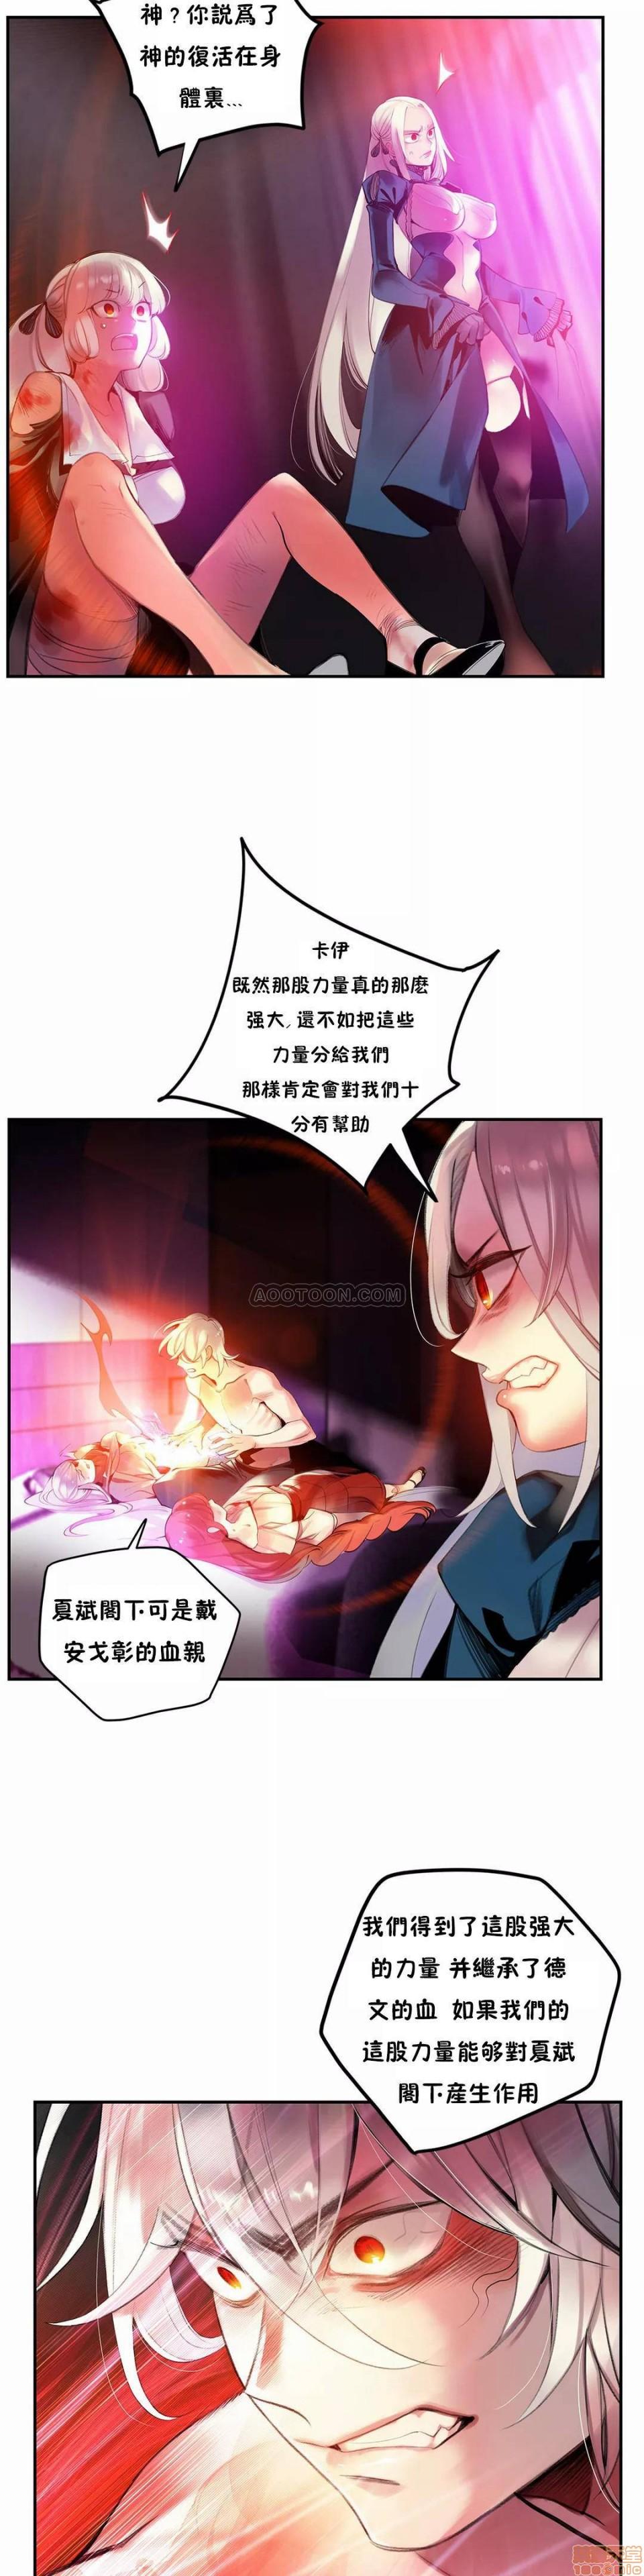 [Juder] Lilith`s Cord (第二季) Ch.77-93 end [Chinese] 37